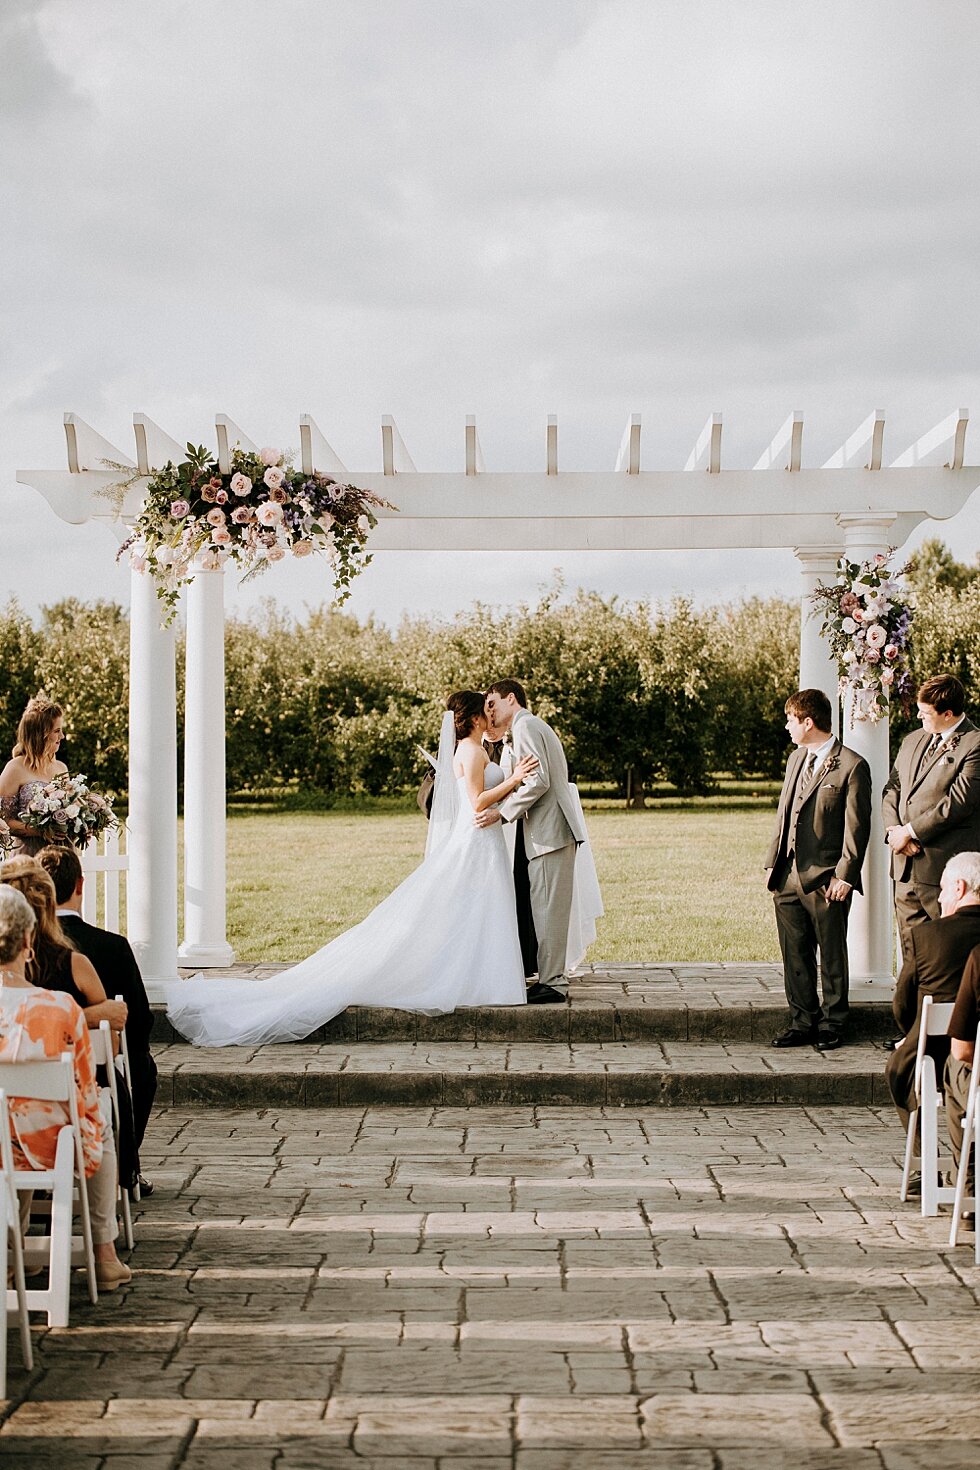  Stunning outdoor ceremony at Huber’s Winery as the bride and groom are pronounced man and wife #weddinggoals #weddingphotographer #married #outdoorceremony #kentuckyphotographer #indianaphotographer #louisvillephotographer #weddingphotos #husbandand